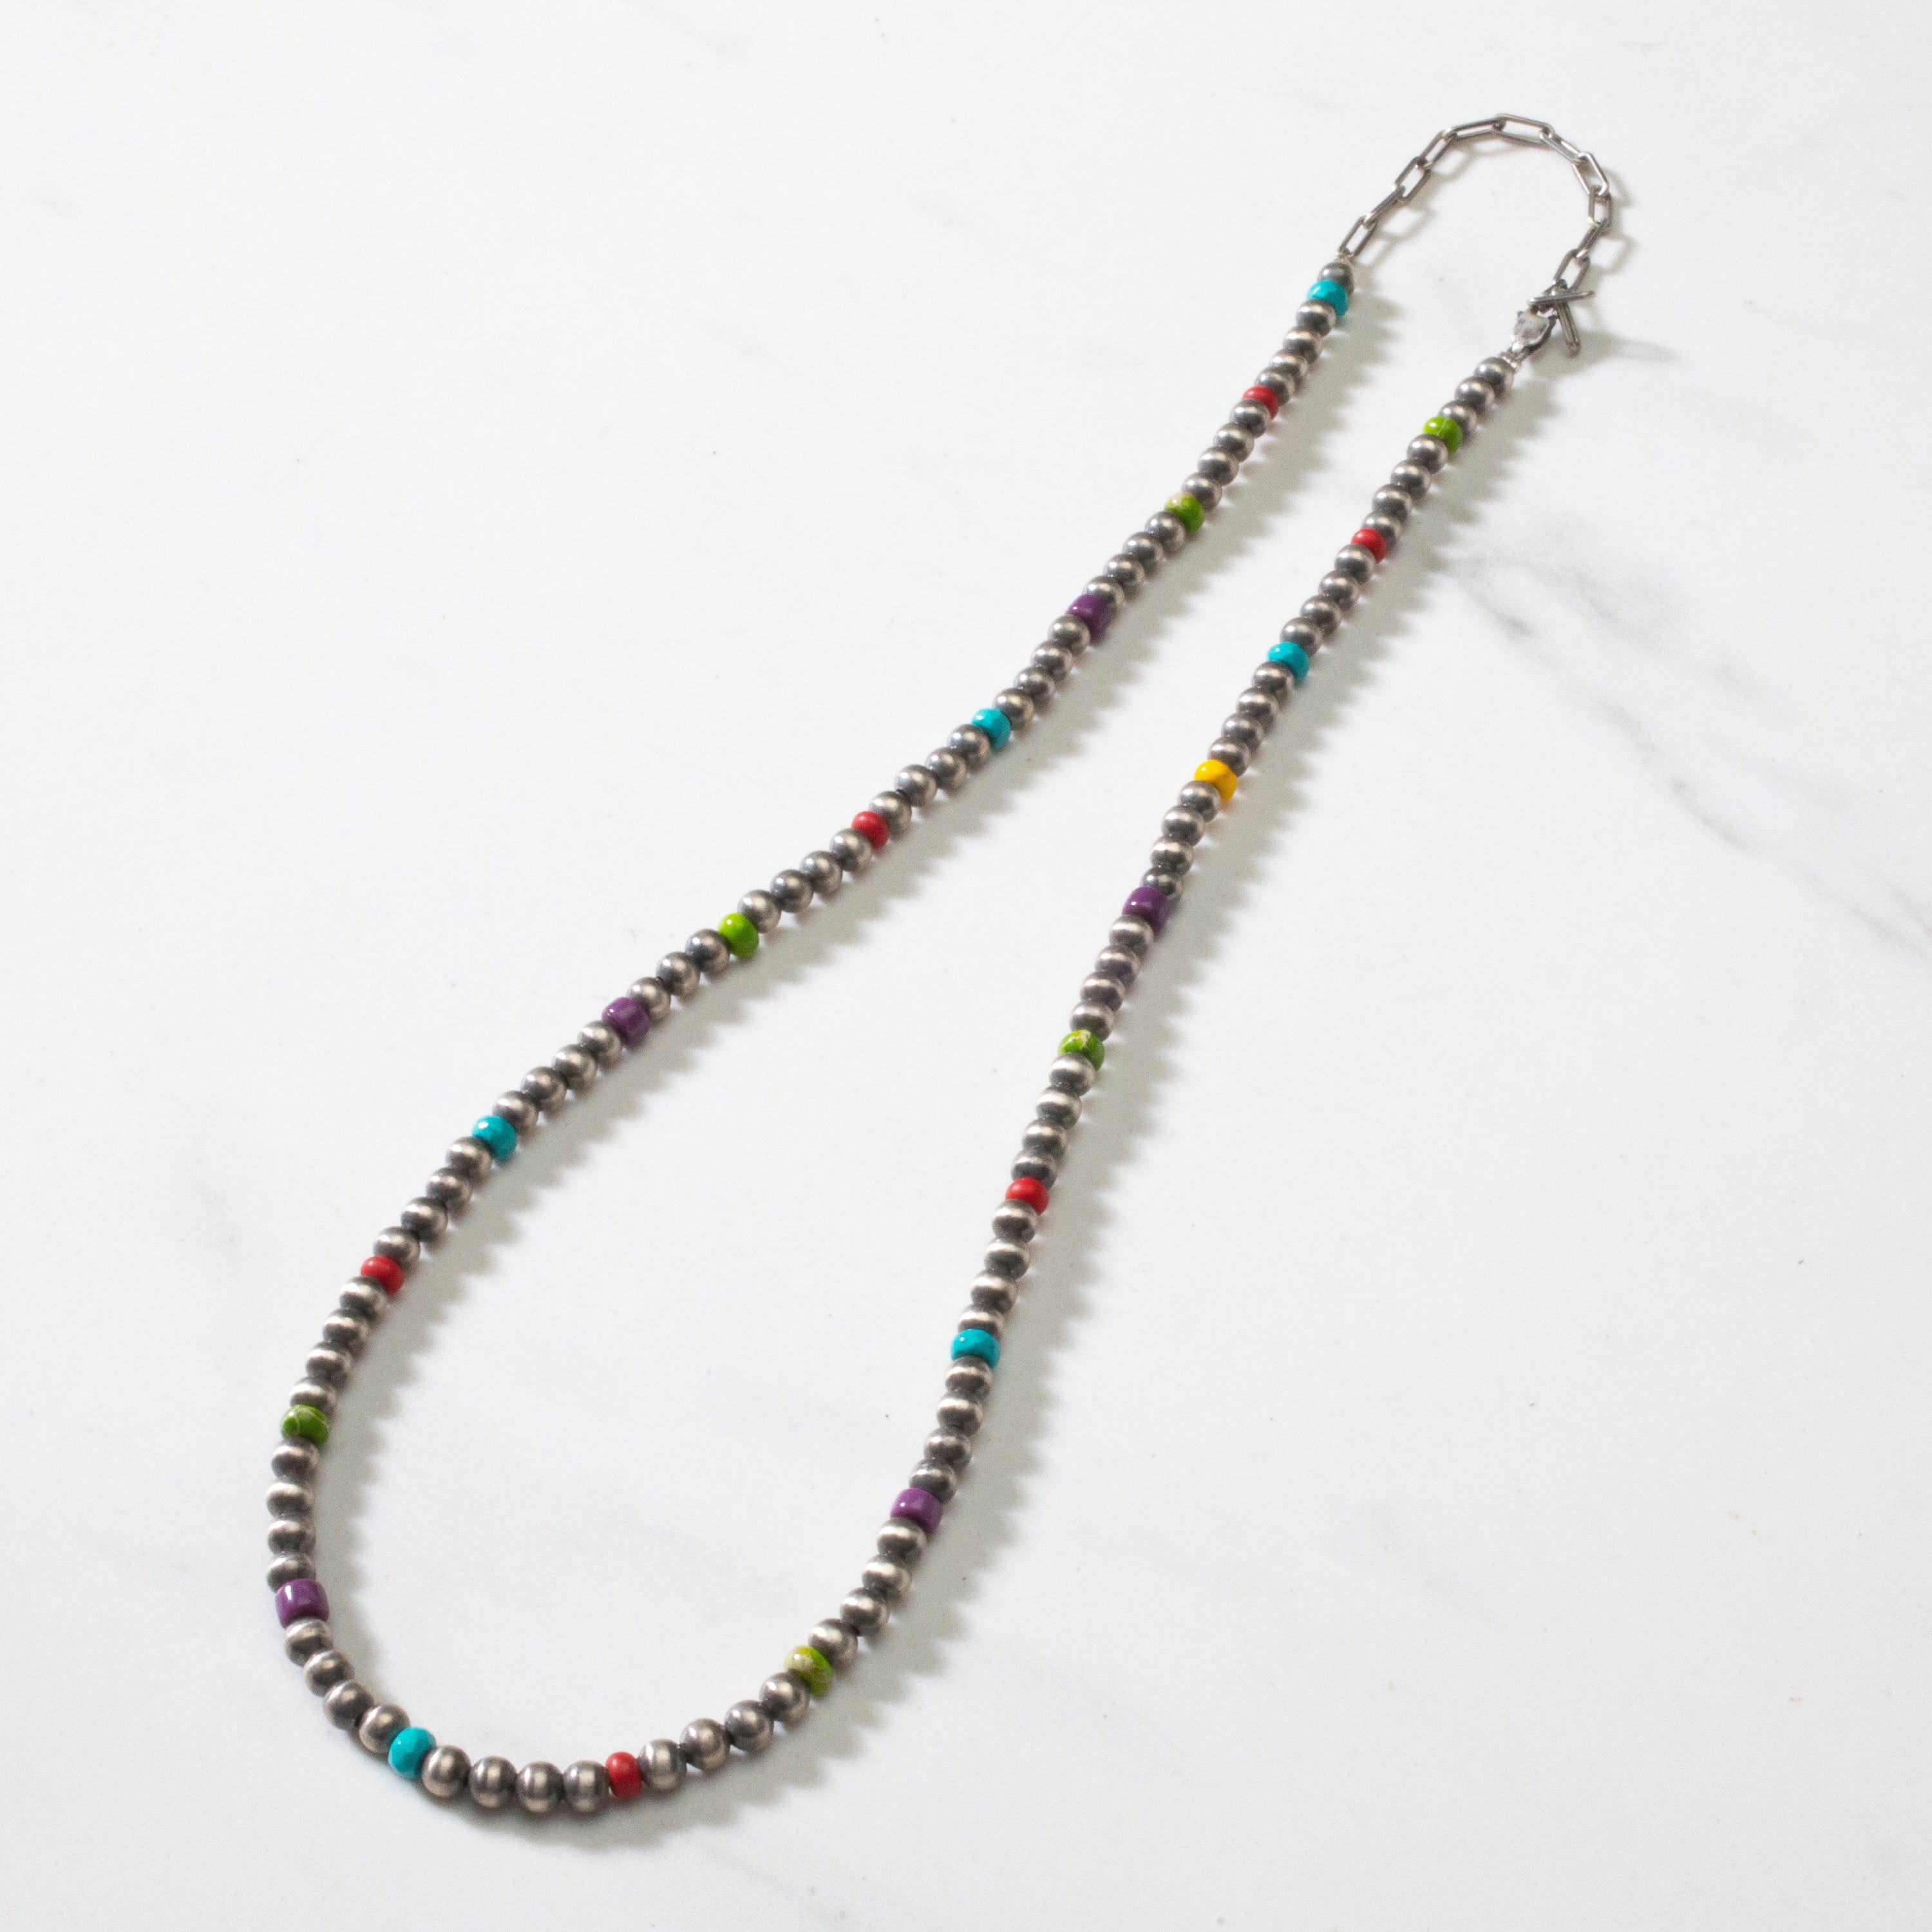 Navajo Ghost Bead and Glass Necklaces - Native American Necklaces